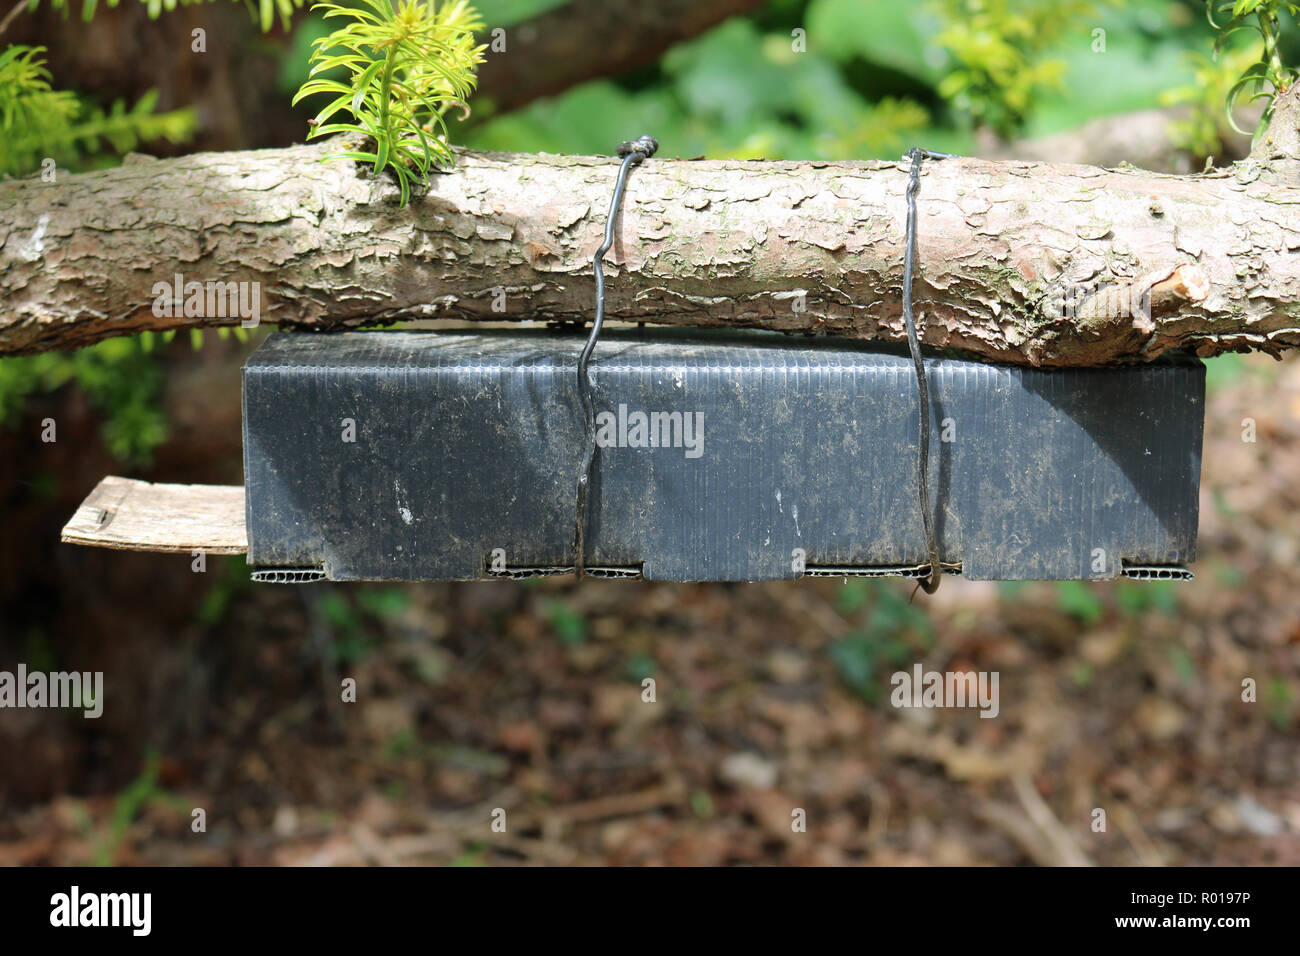 Black plastic and wood dormouse (Muscardinus avellanarius) nest tube survey box attached underneath a tree branch with wire. Stock Photo